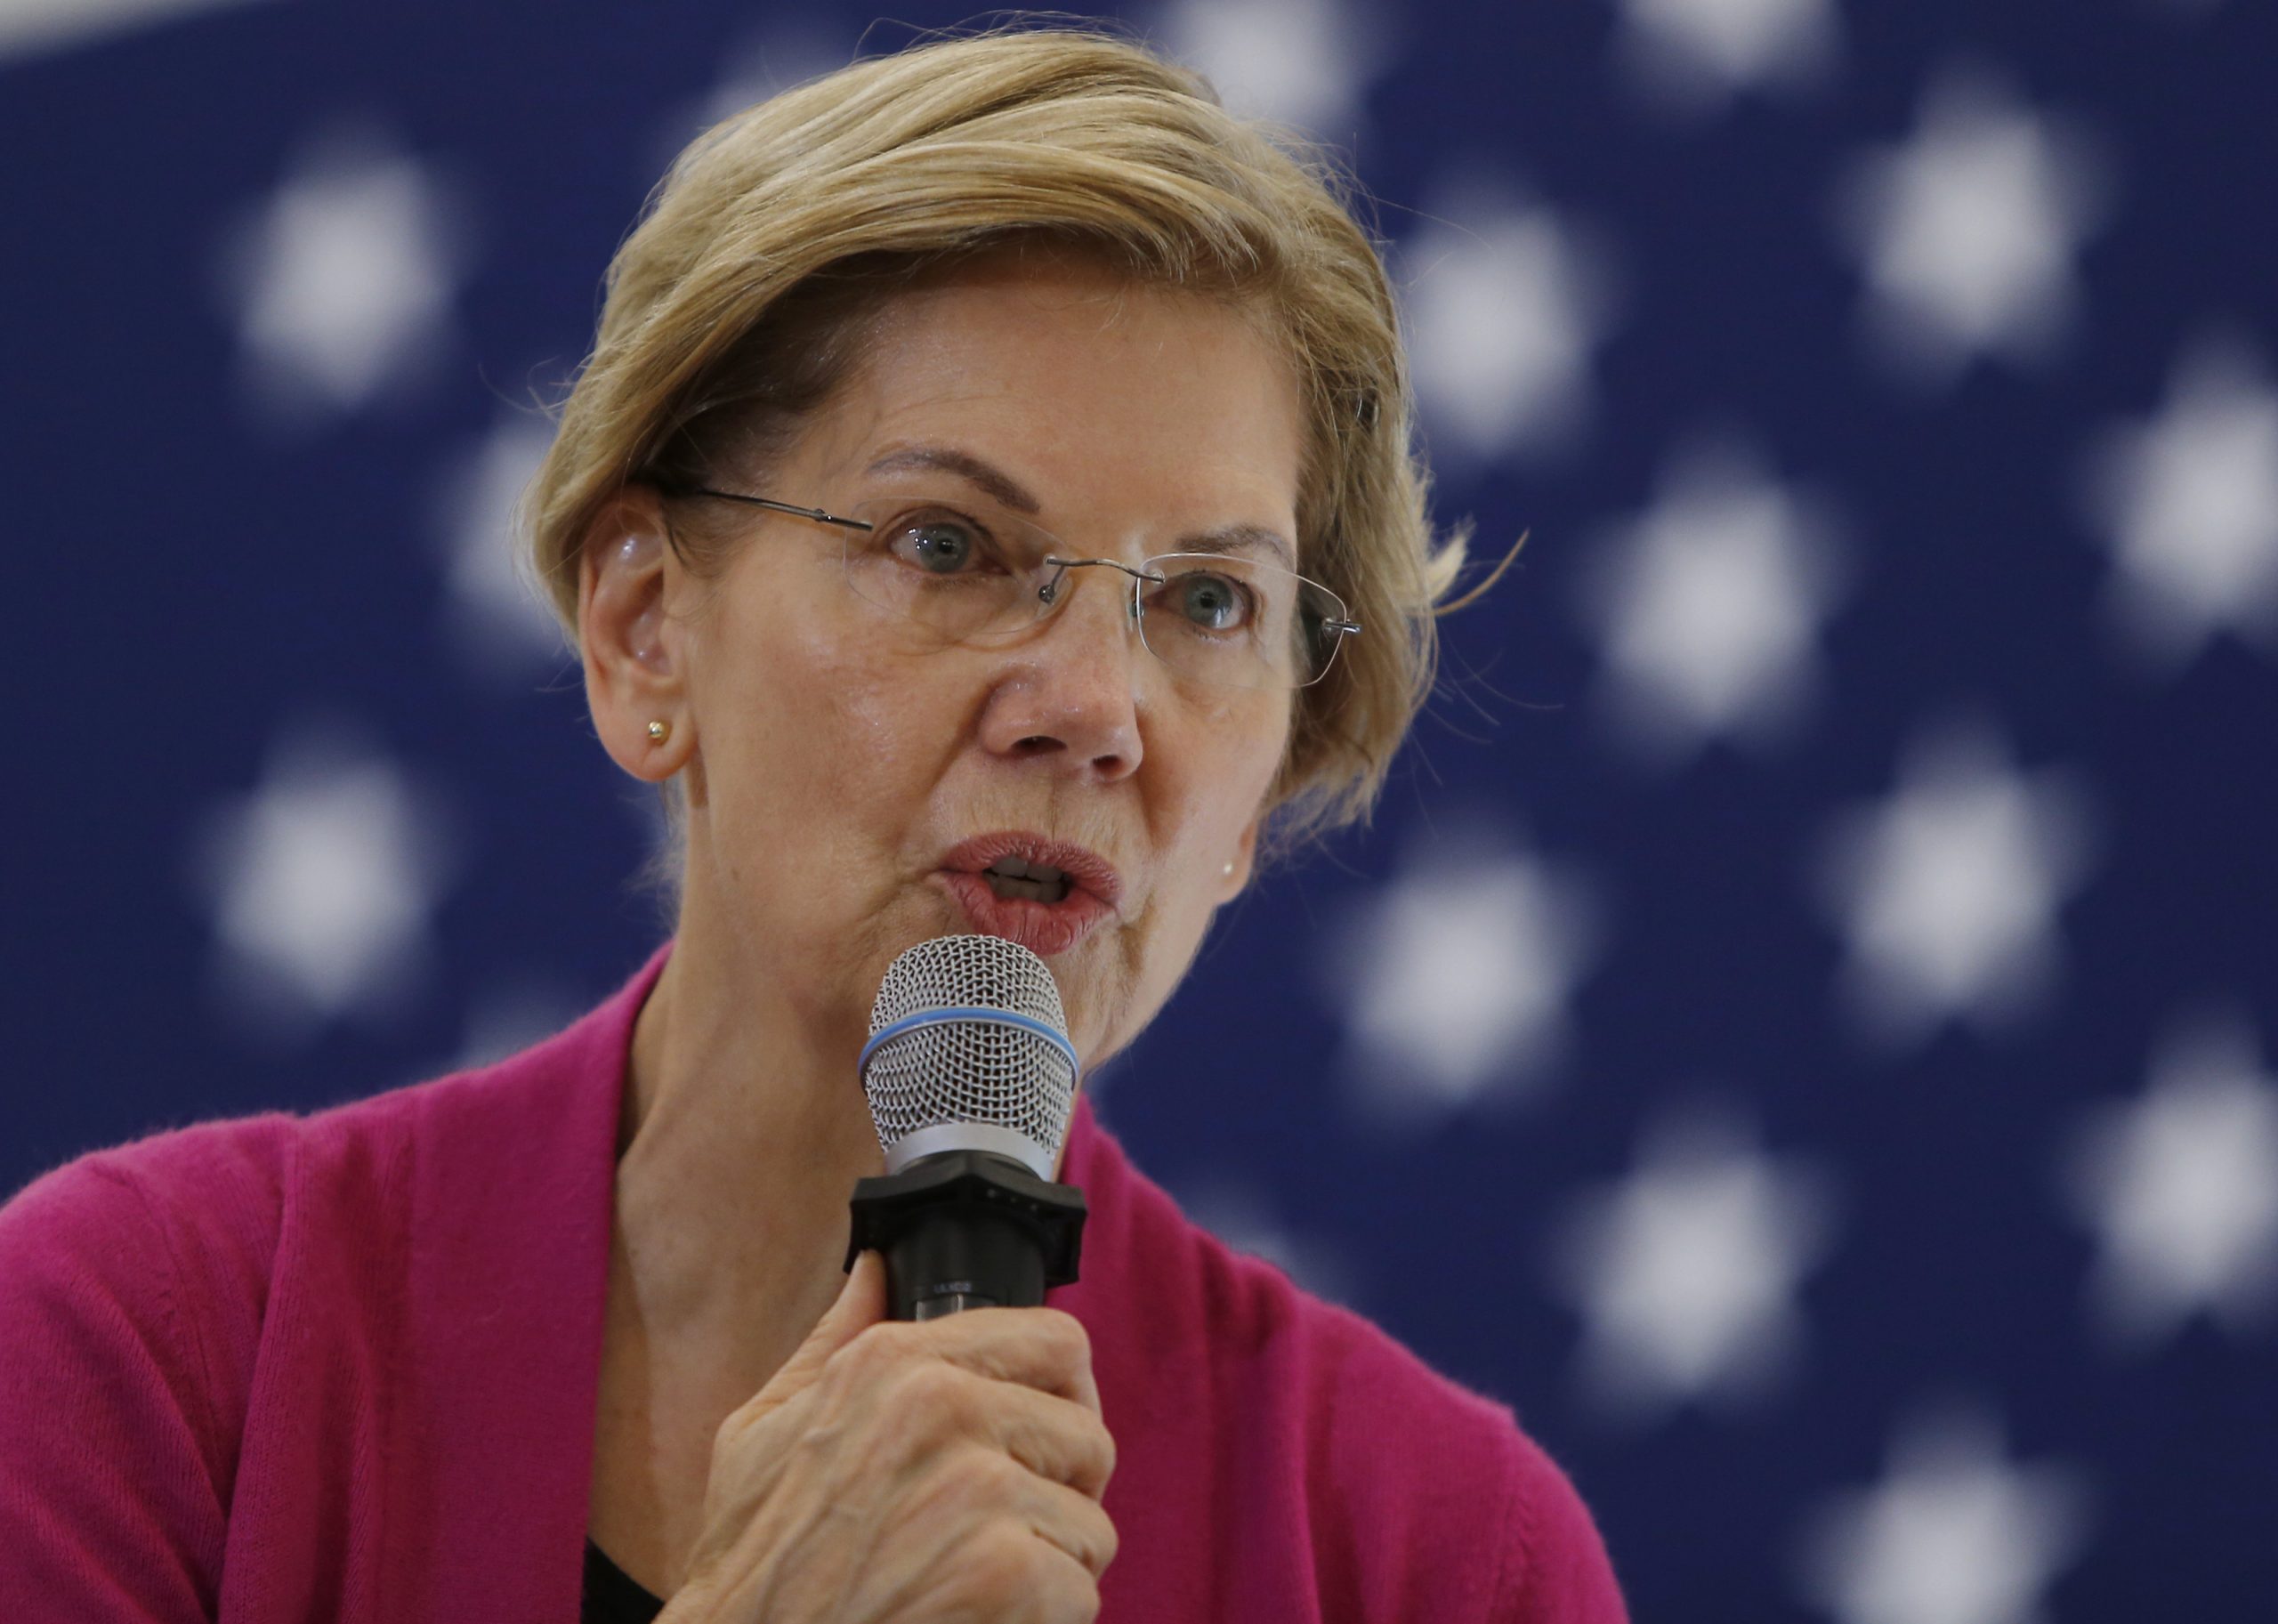 Senator and presidential candidate Elizabeth Warren speaks during a town hall at the University of New Hampshire in Durham, NH on Oct. 30, 2019. (Jessica Rinaldi—Boston Globe/Getty Images)